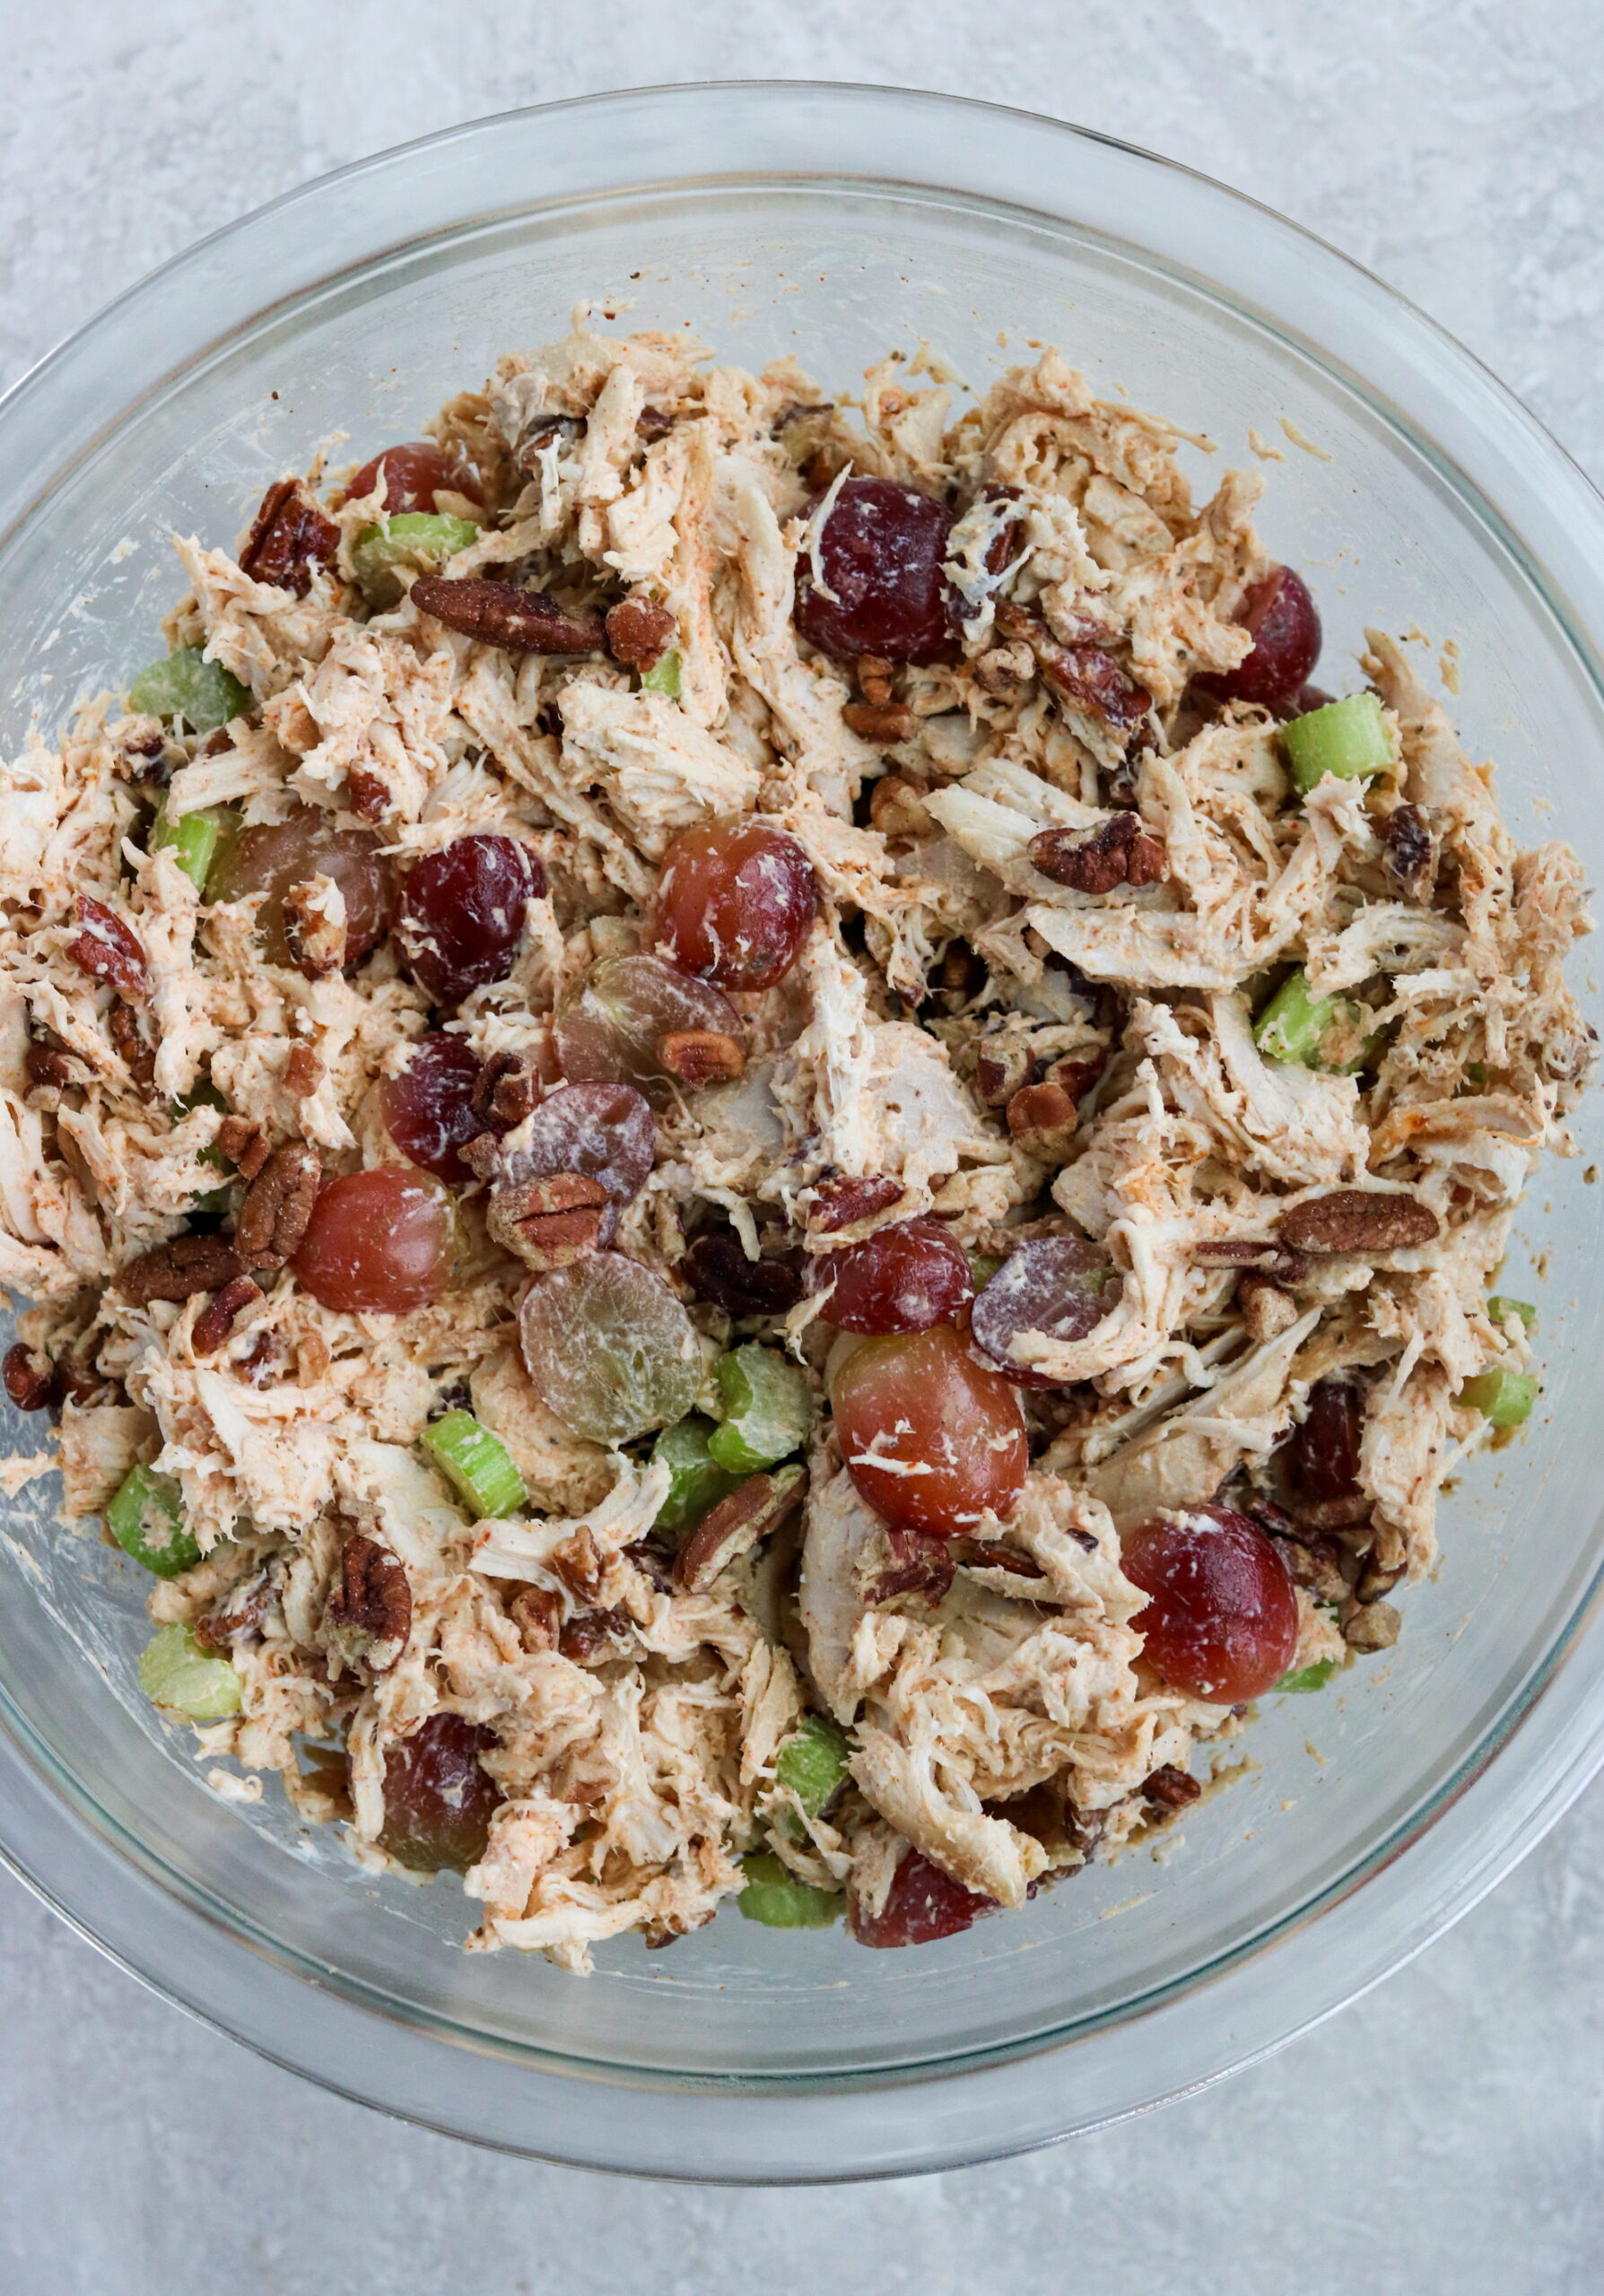 ingredients in a glass bowl with grapes, pecans, and celery